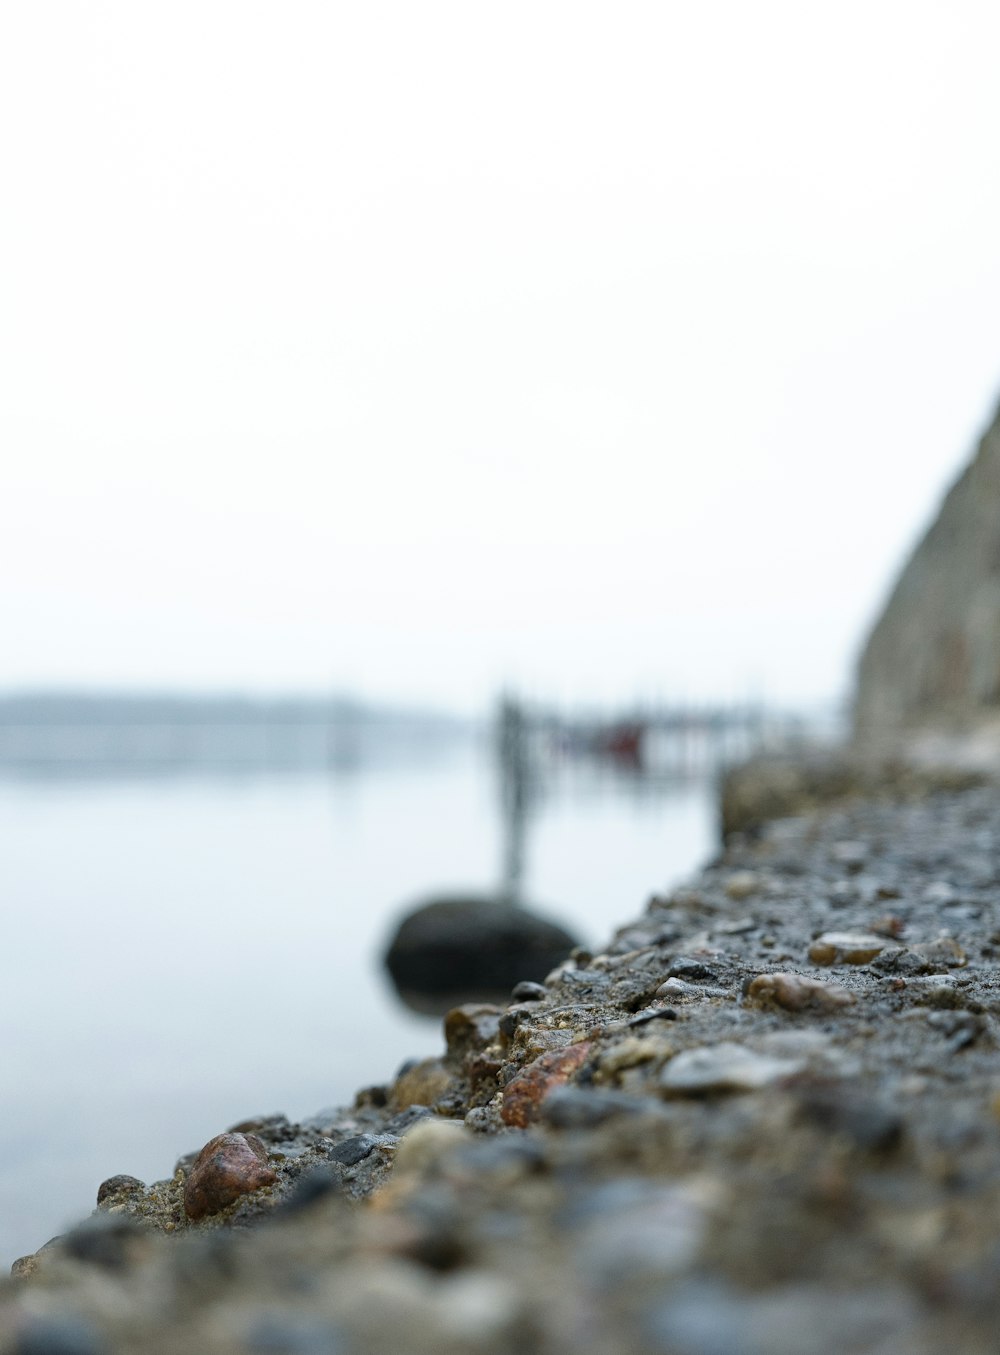 a close up of a rock wall near a body of water